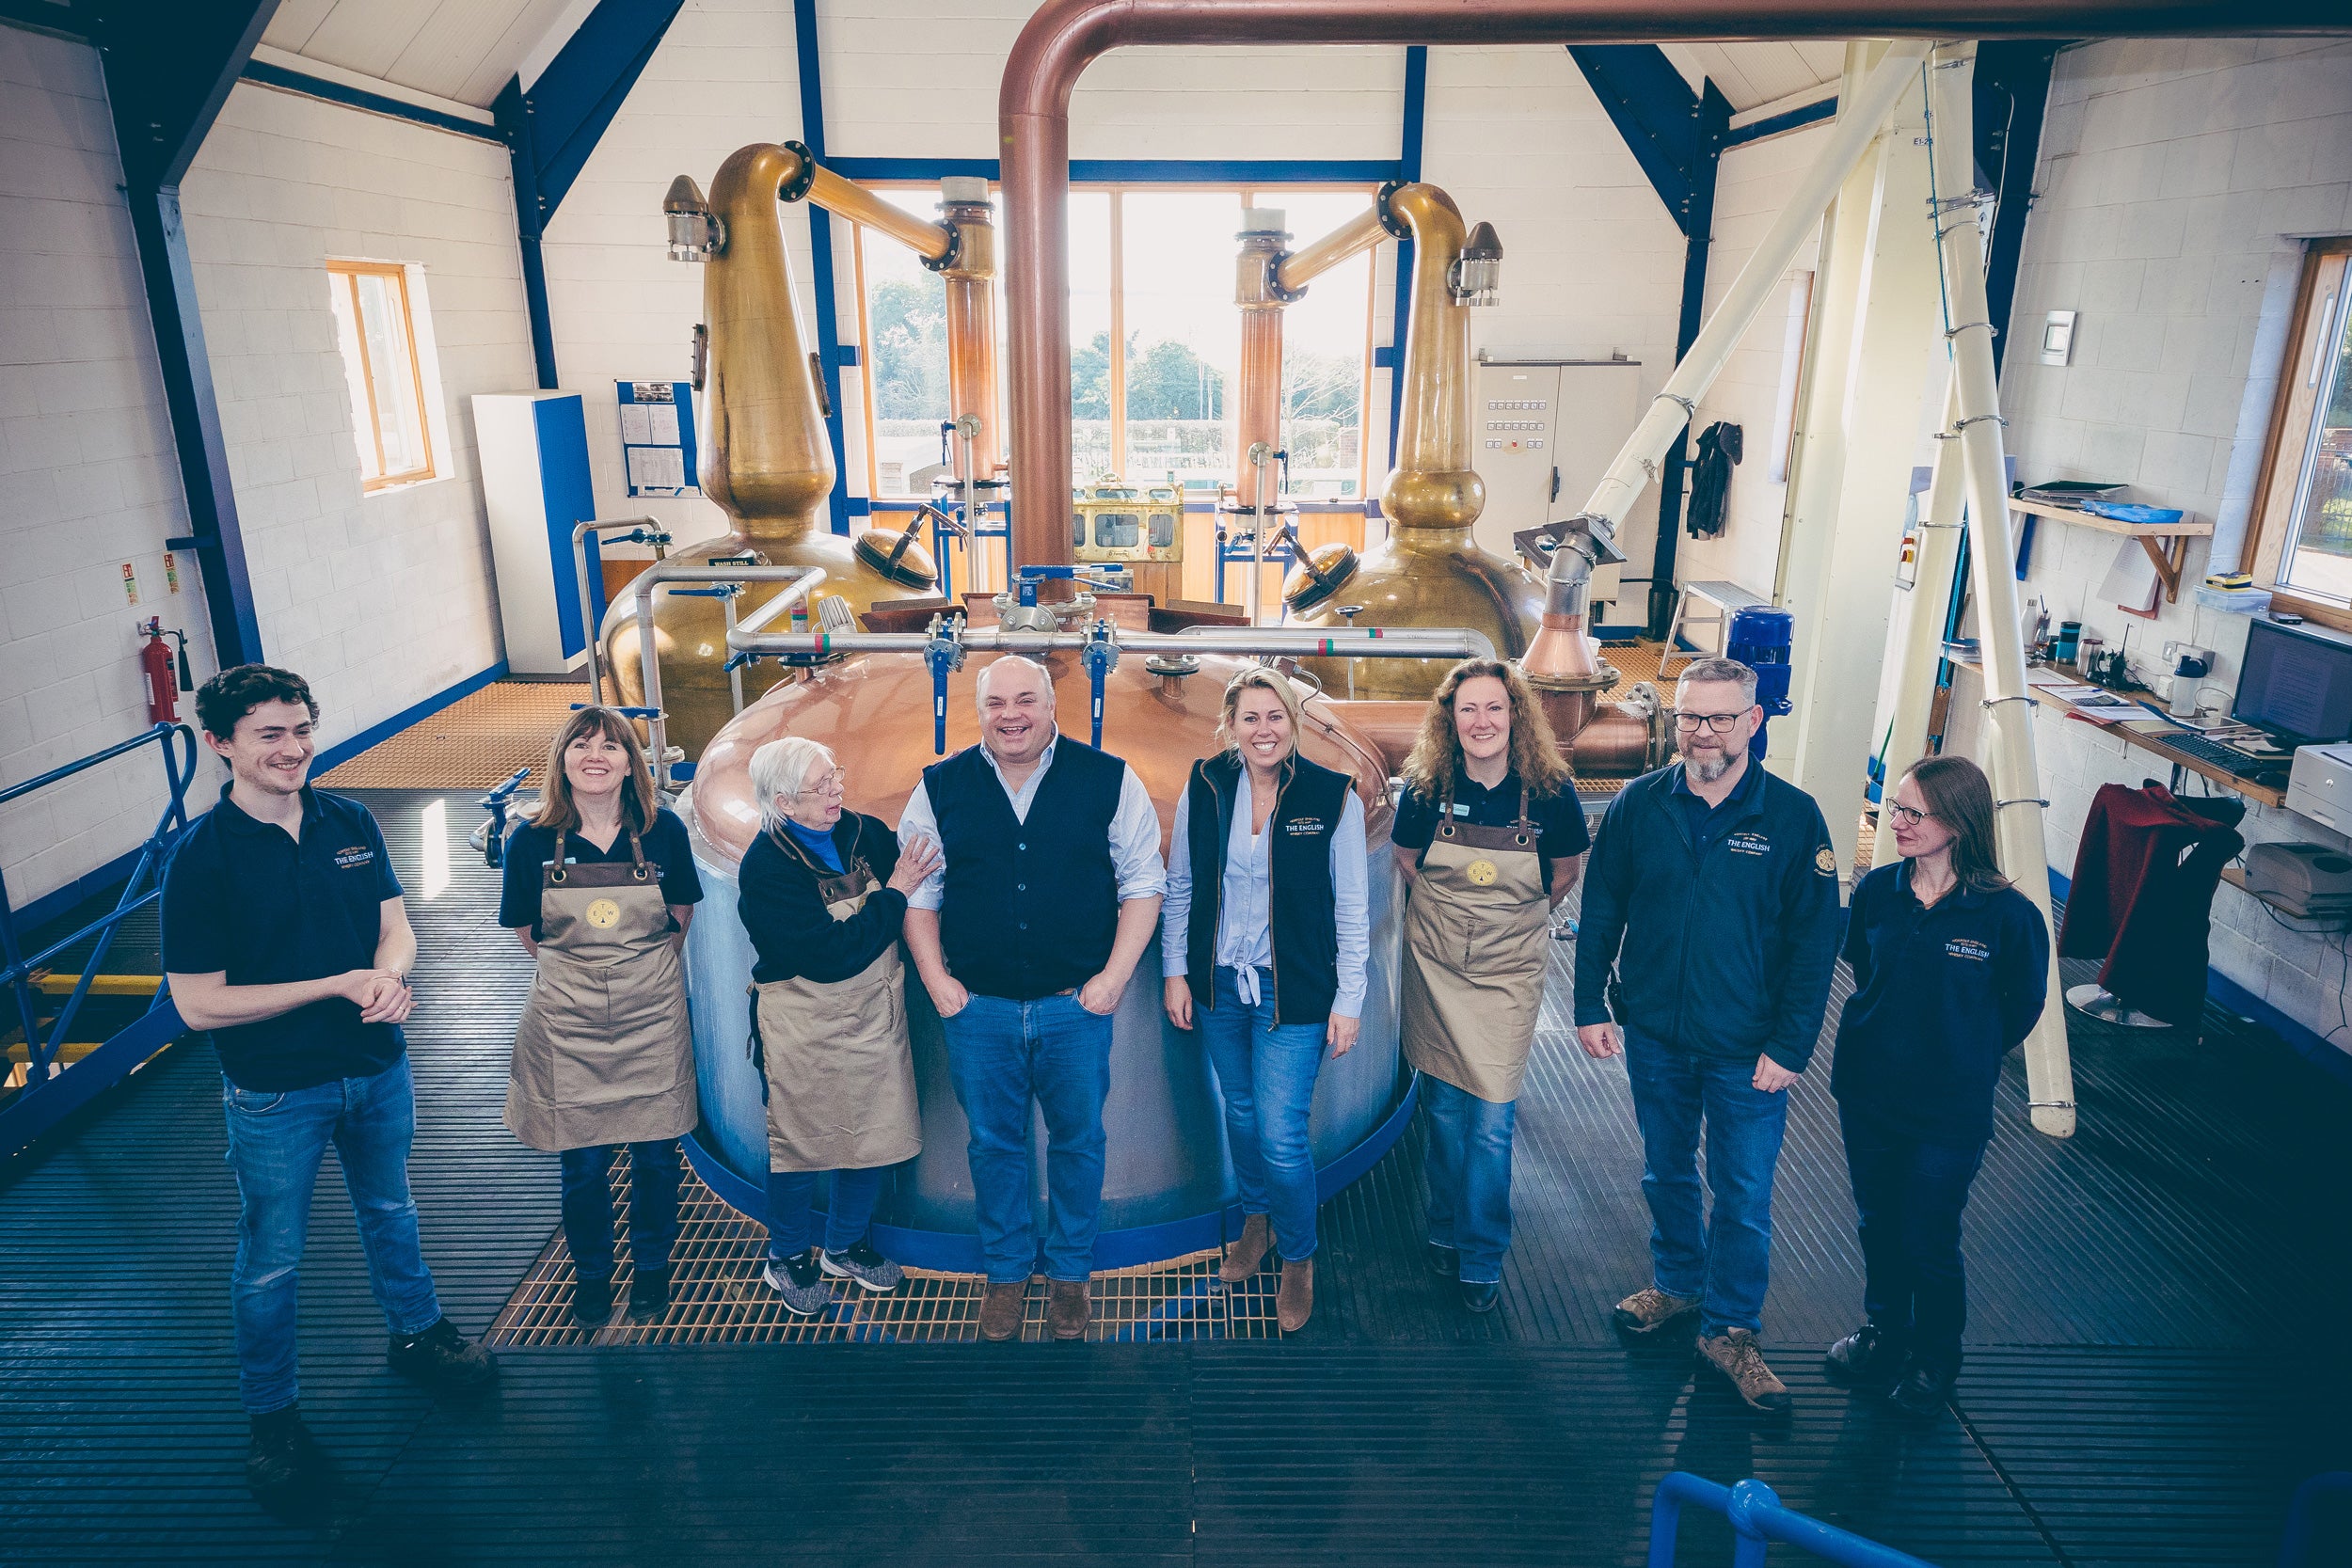 The distillery team with Andrew and Katy Nelstrop on the distilling floor